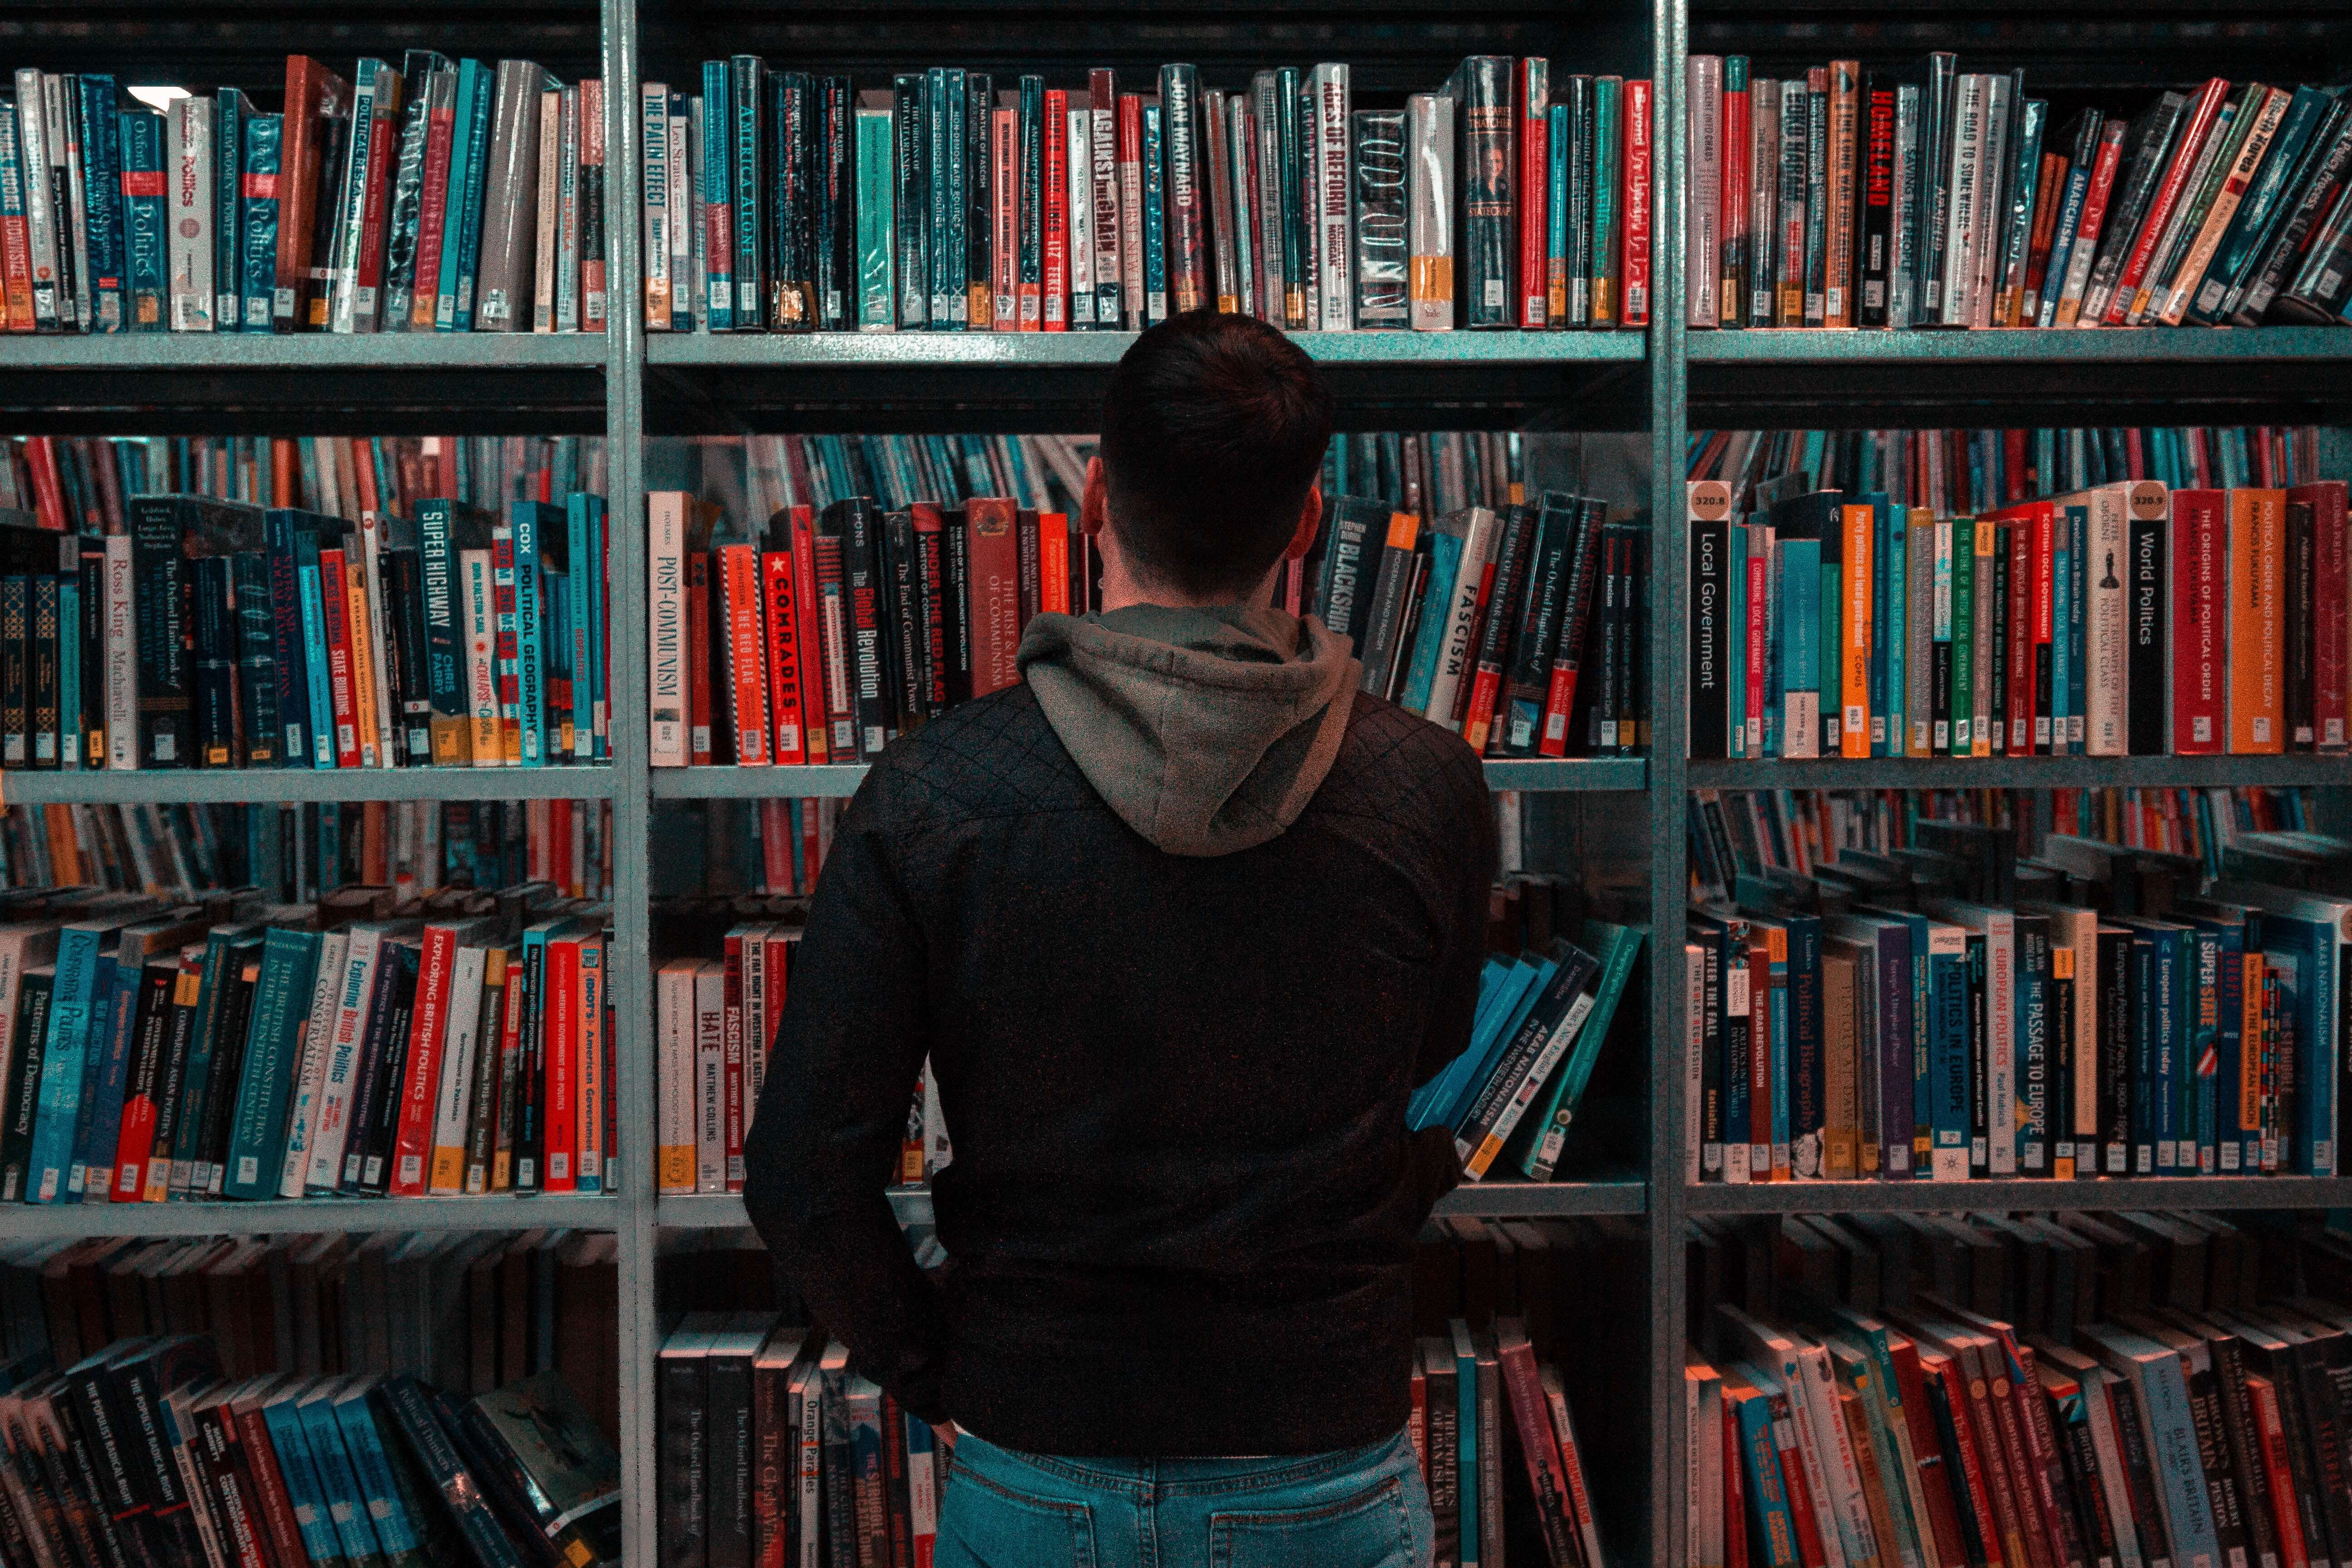 A person browsing a shelf at a library